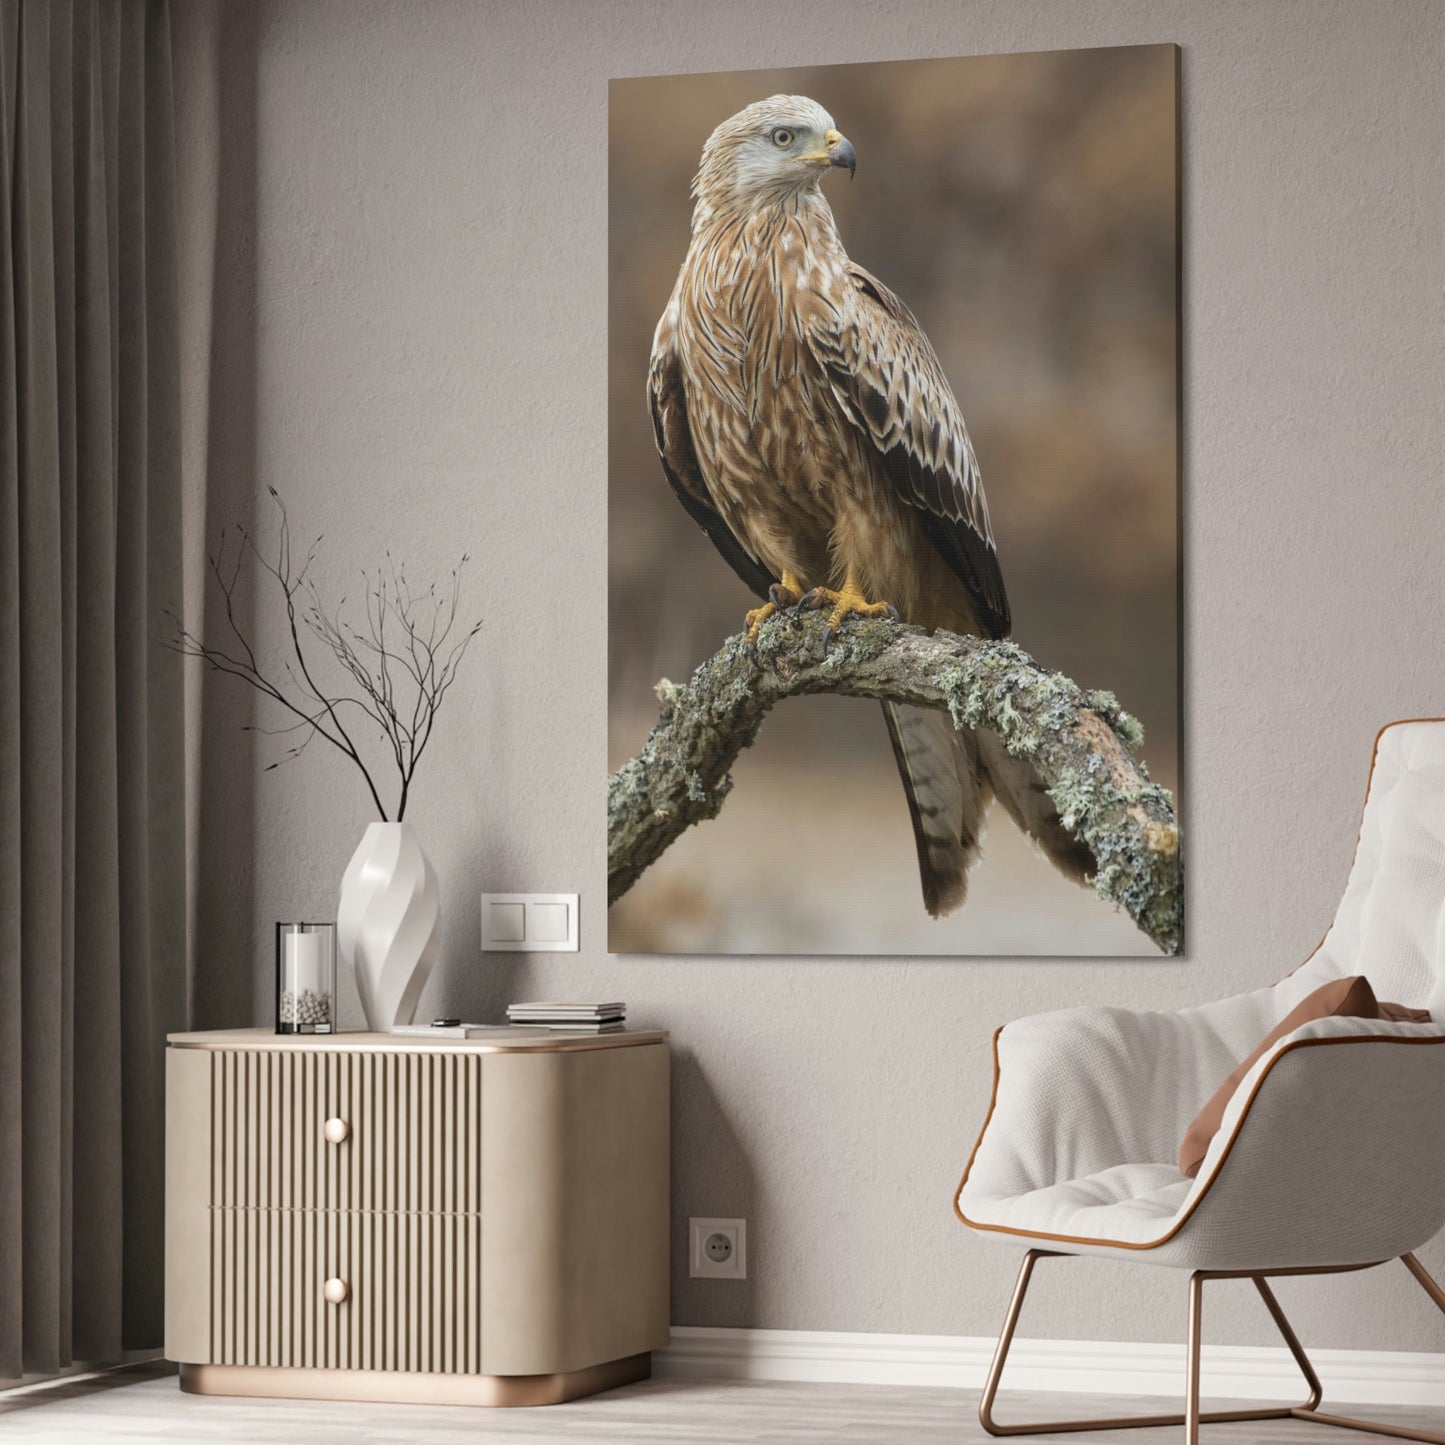 Wings of Majesty: Poster & Canvas Celebrating the Power of Eagles